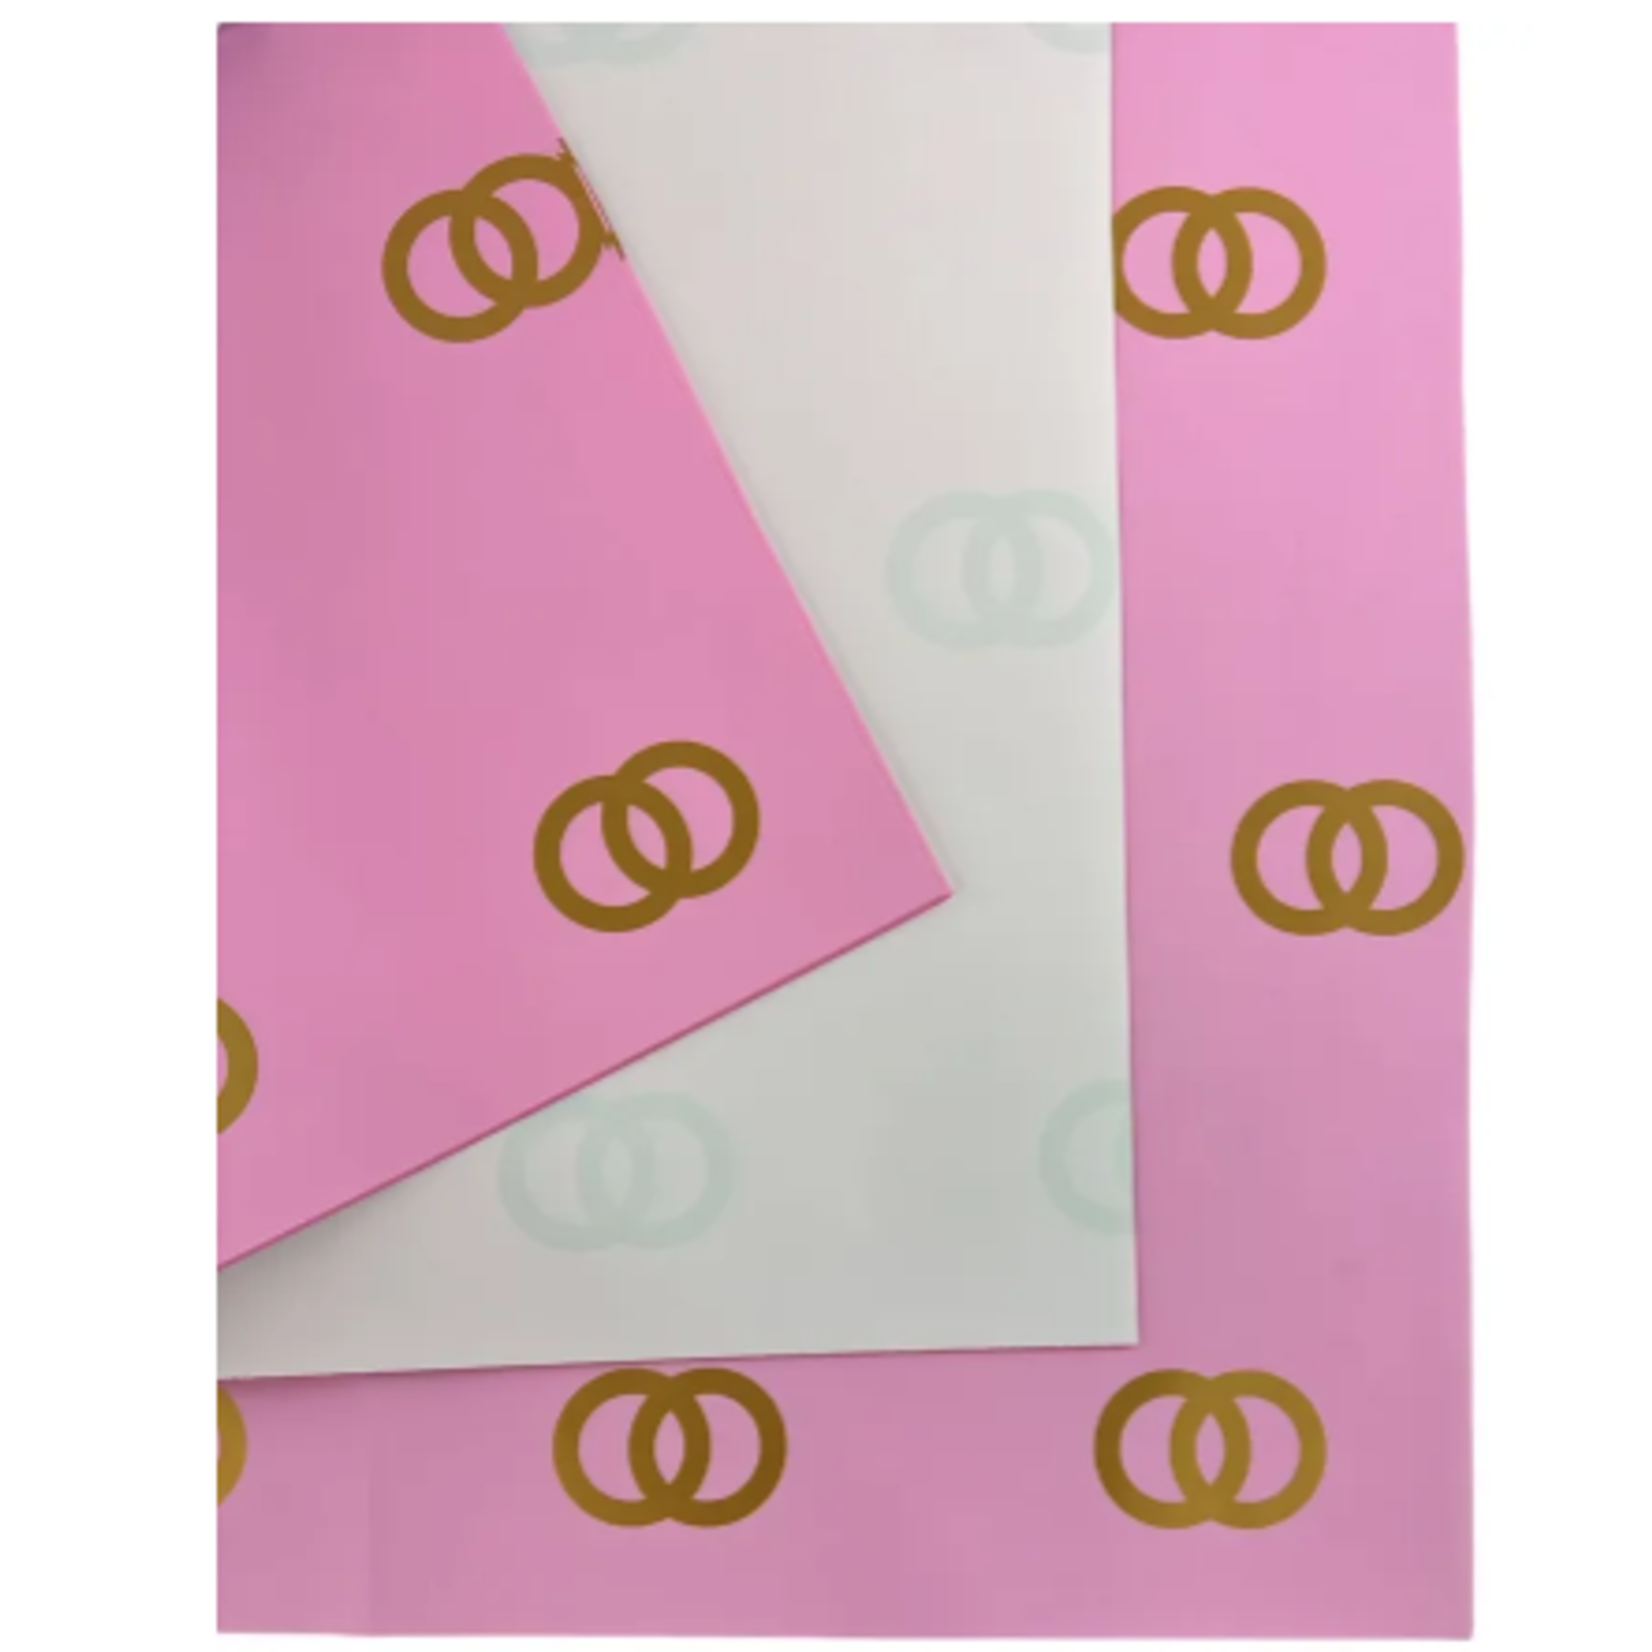 PINK FLORAL PAPER WITH GOLD DESIGN, 20 PIECES